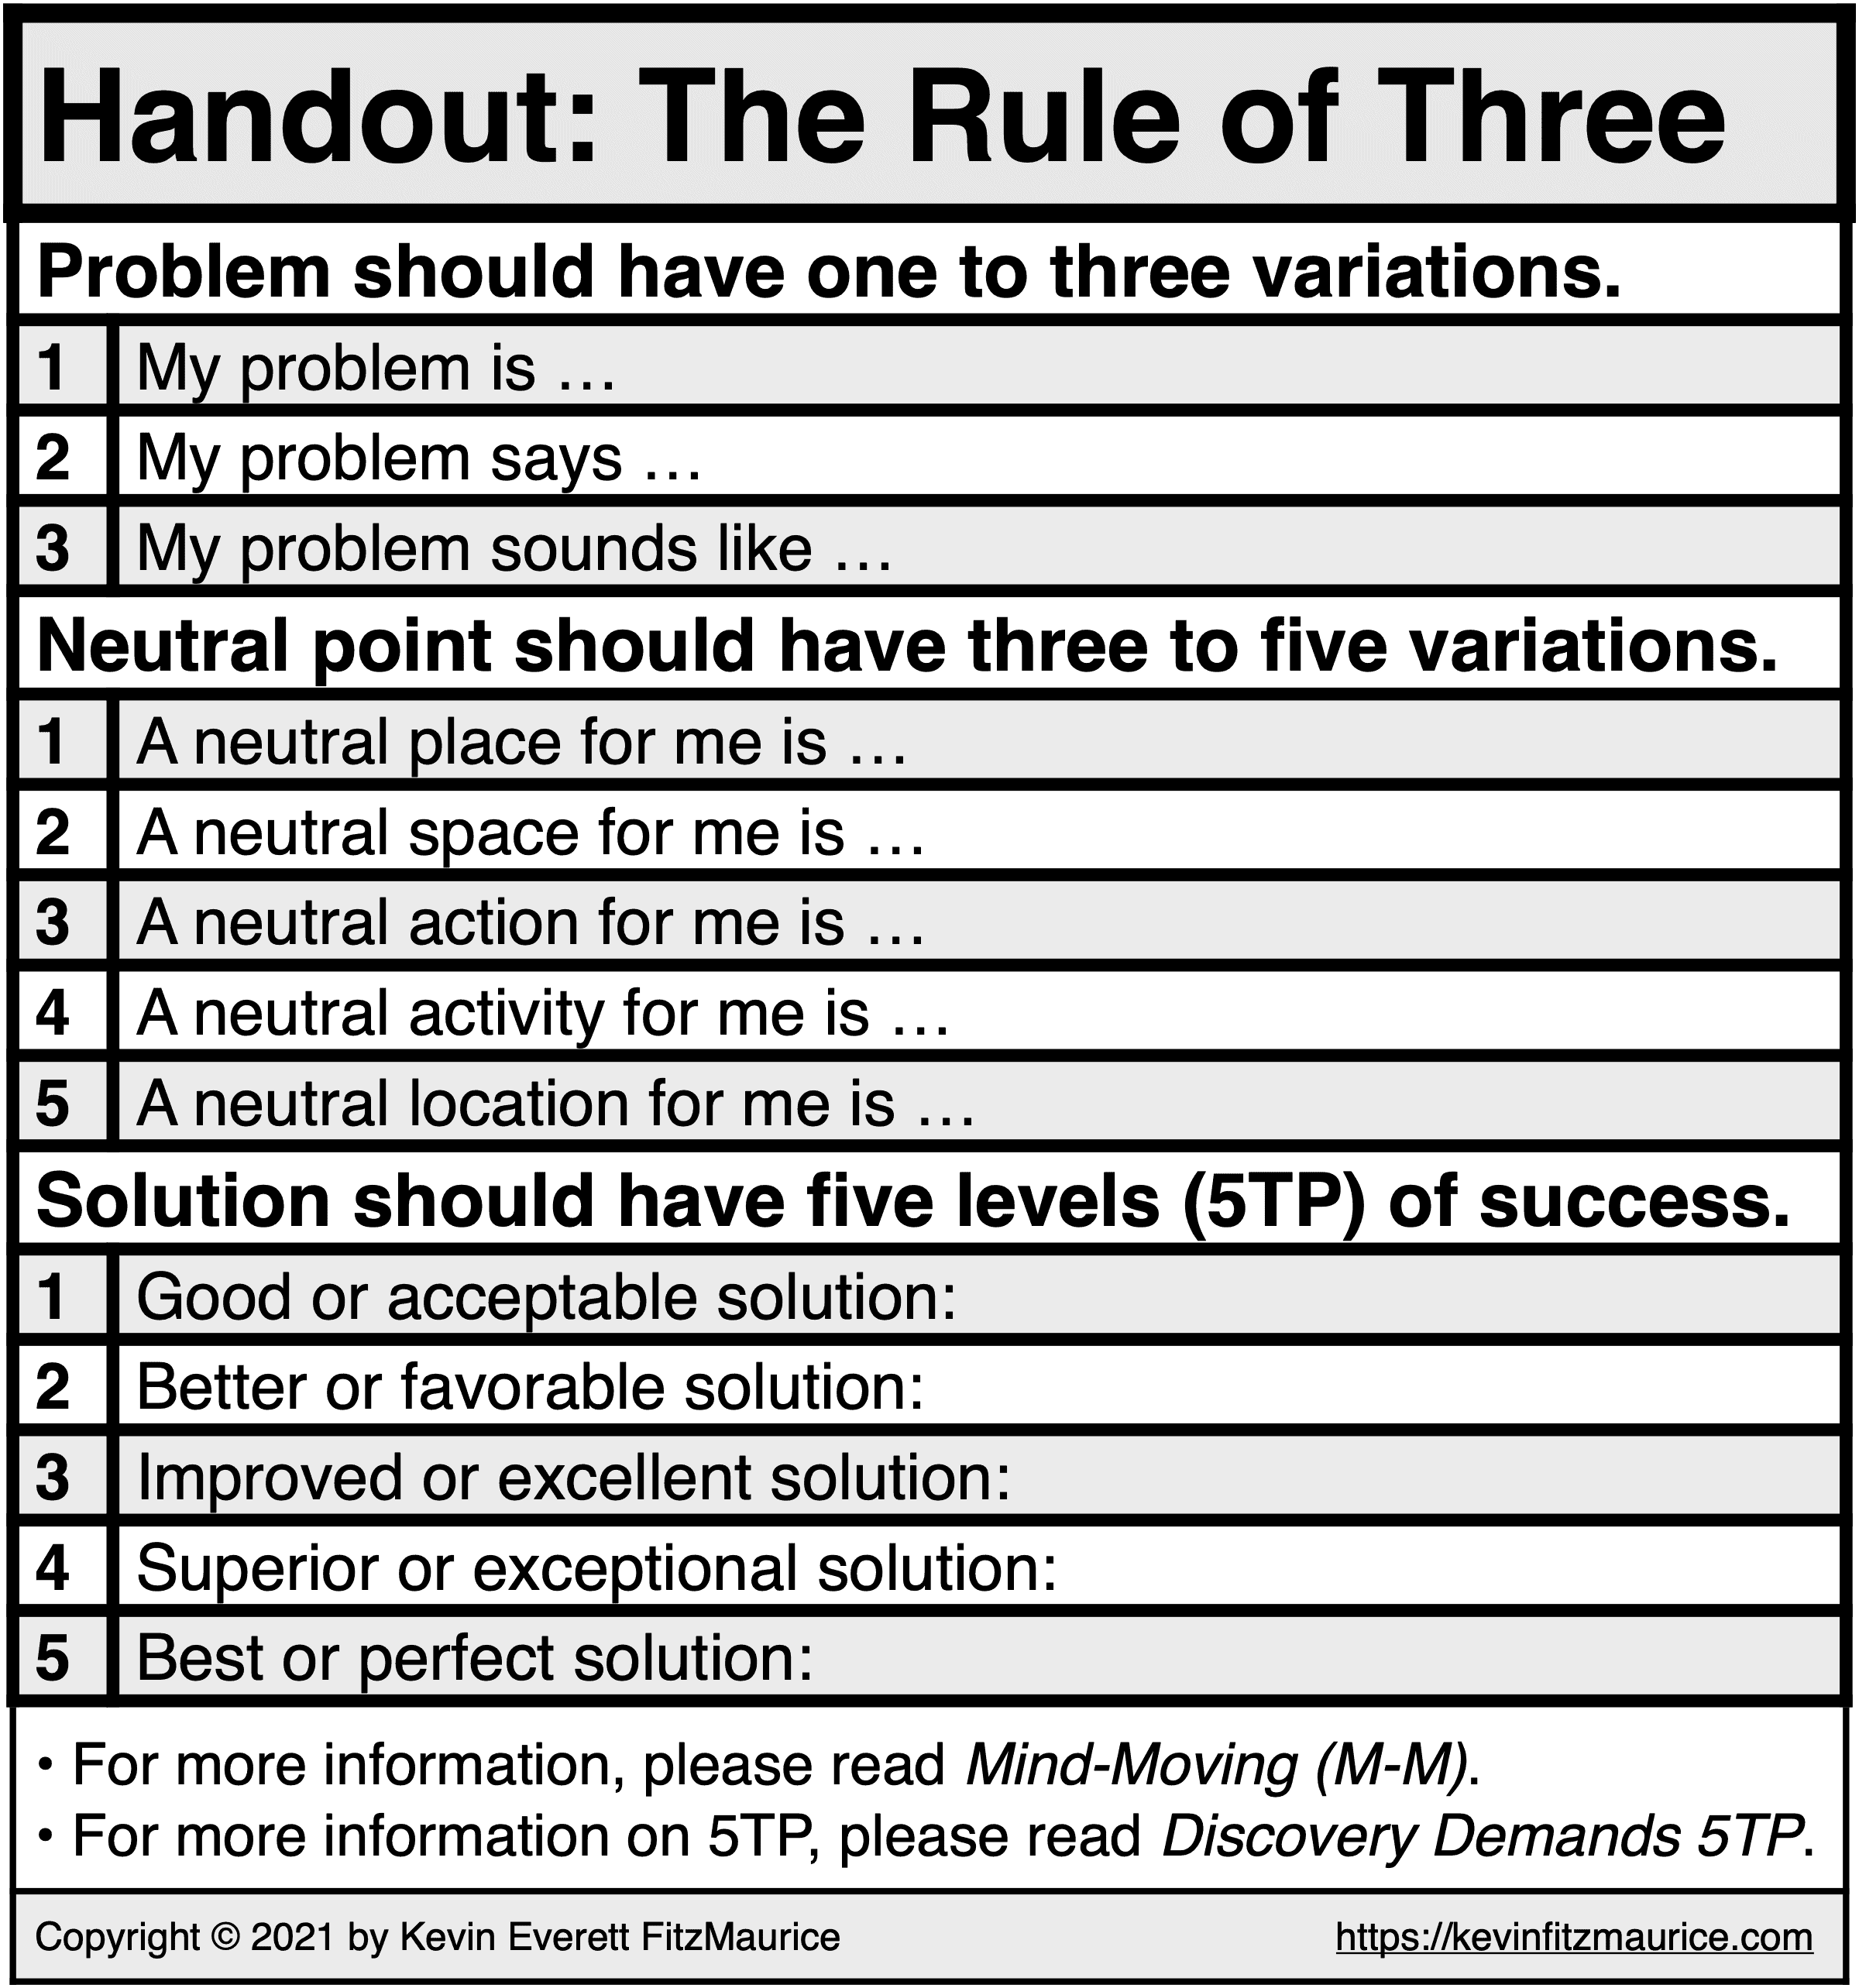 Mind-Moving Handouts: The Rule of Three